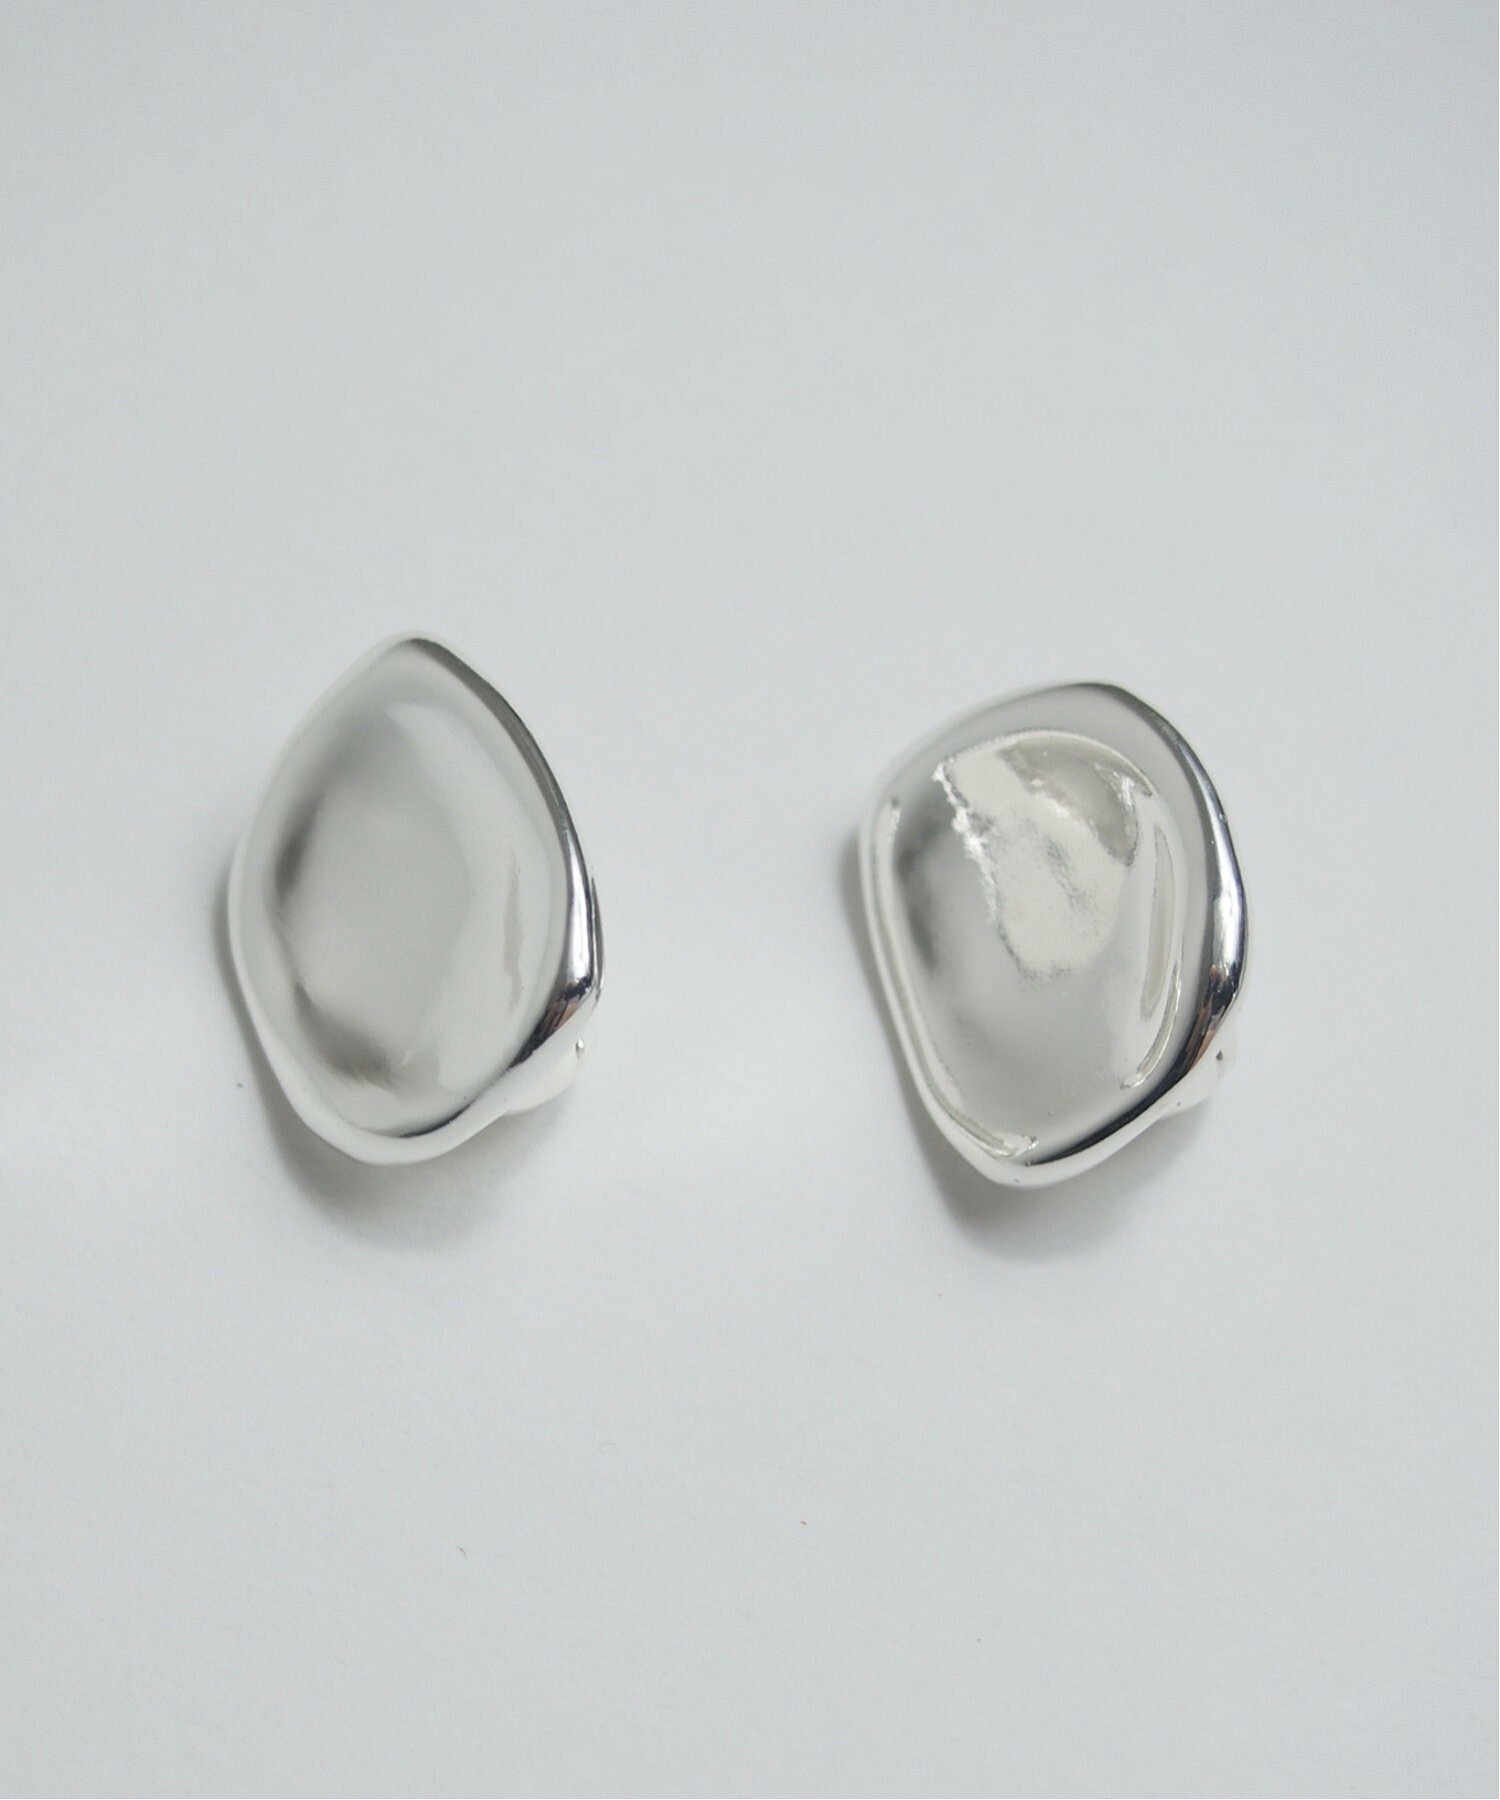 Nothing And Others/Bumpmotif Earring